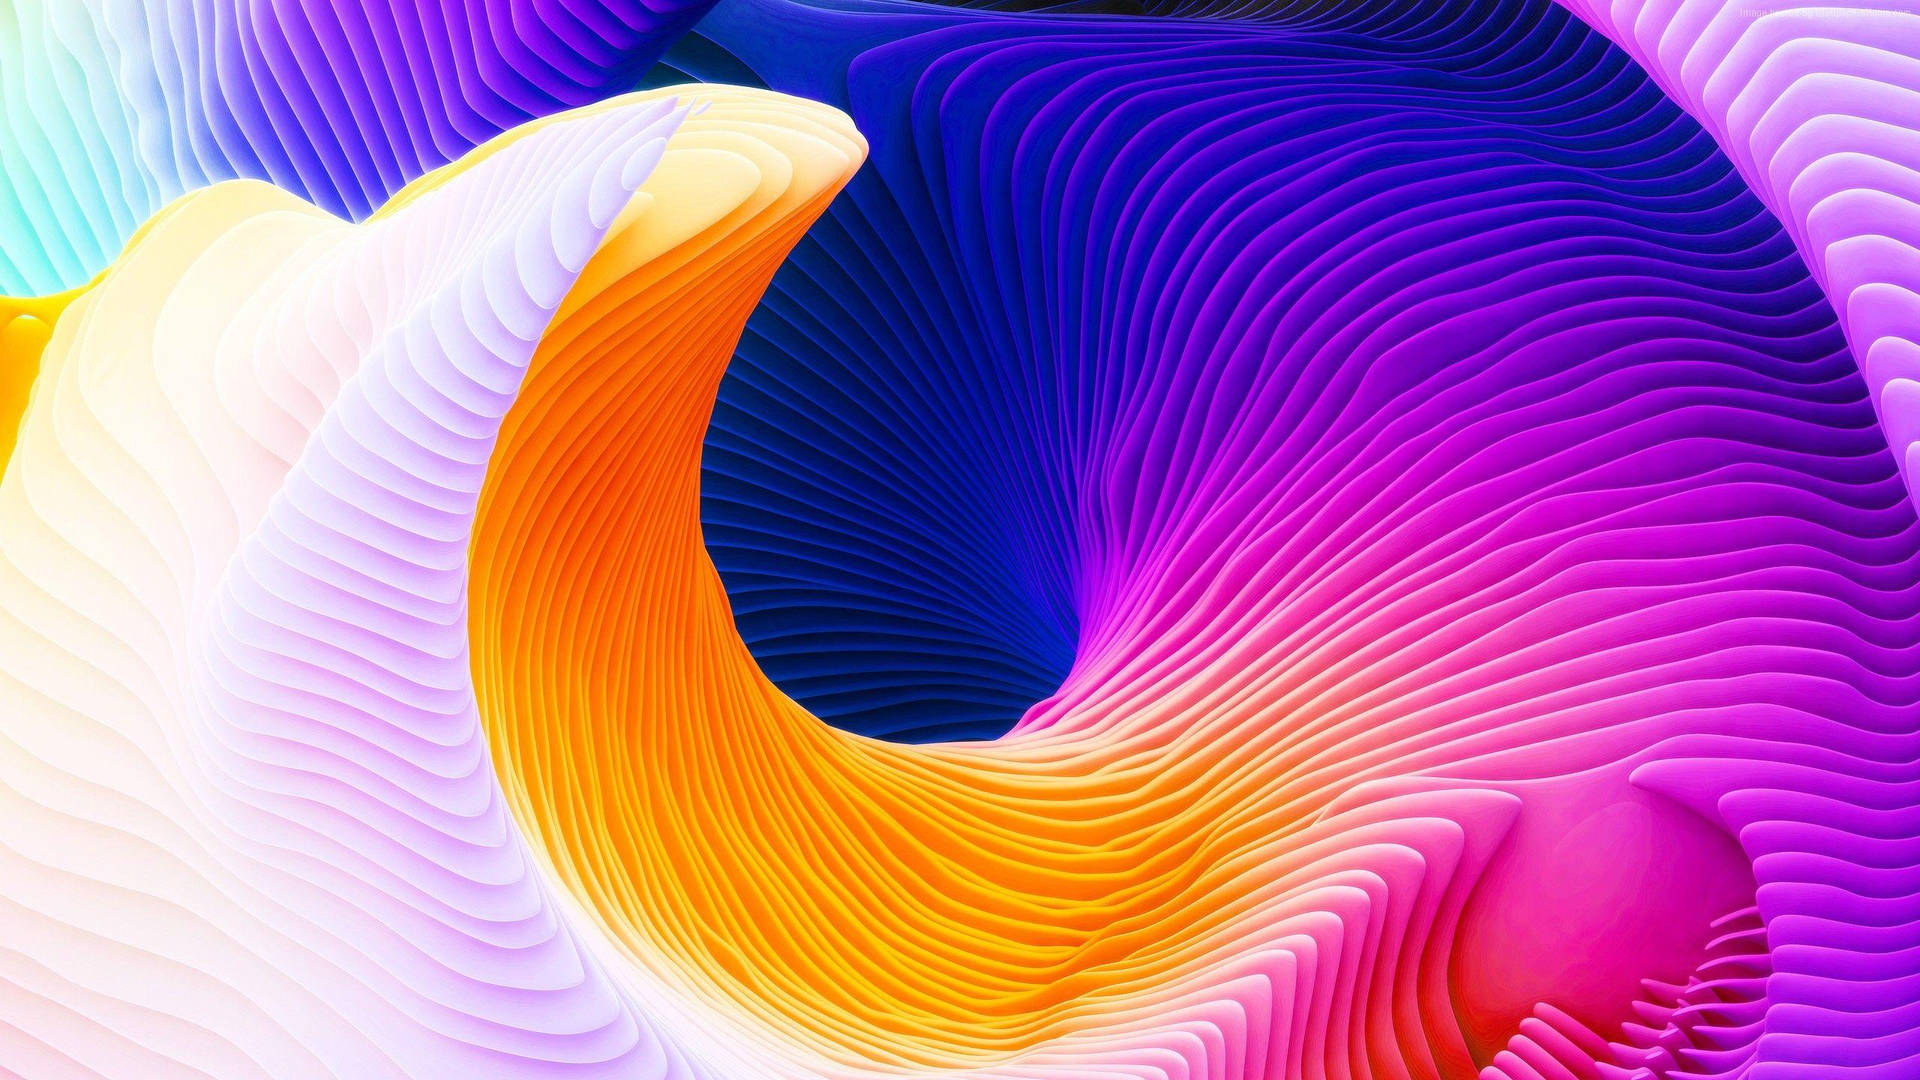 Abstract Spiral Live 3d